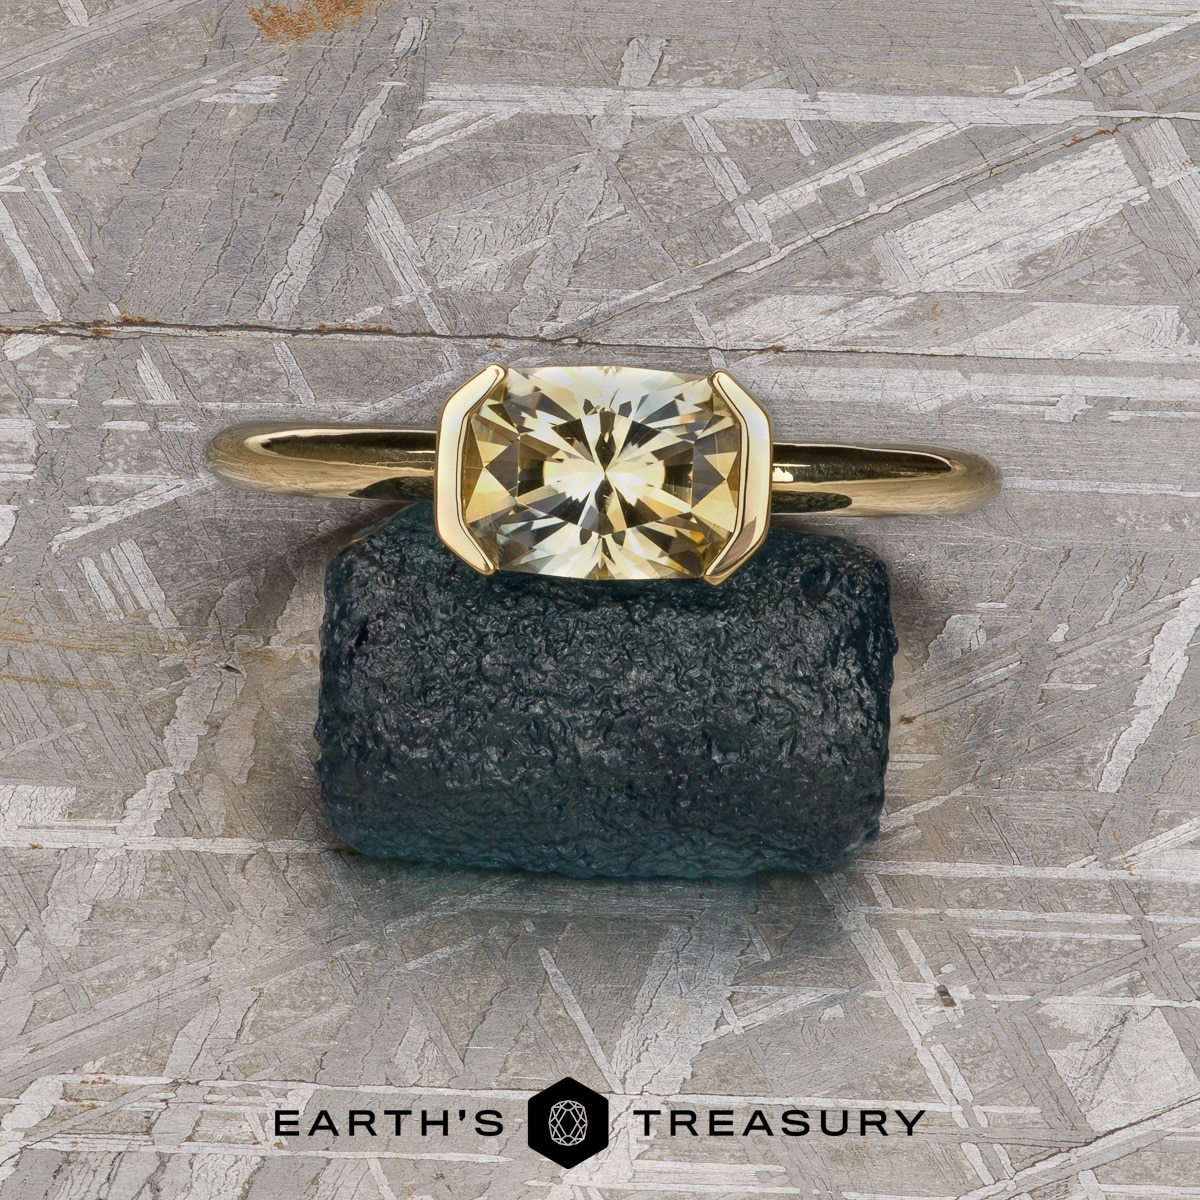 The “Larisa” Solitaire in 18k yellow gold with 1.35-Carat Montana sapphire